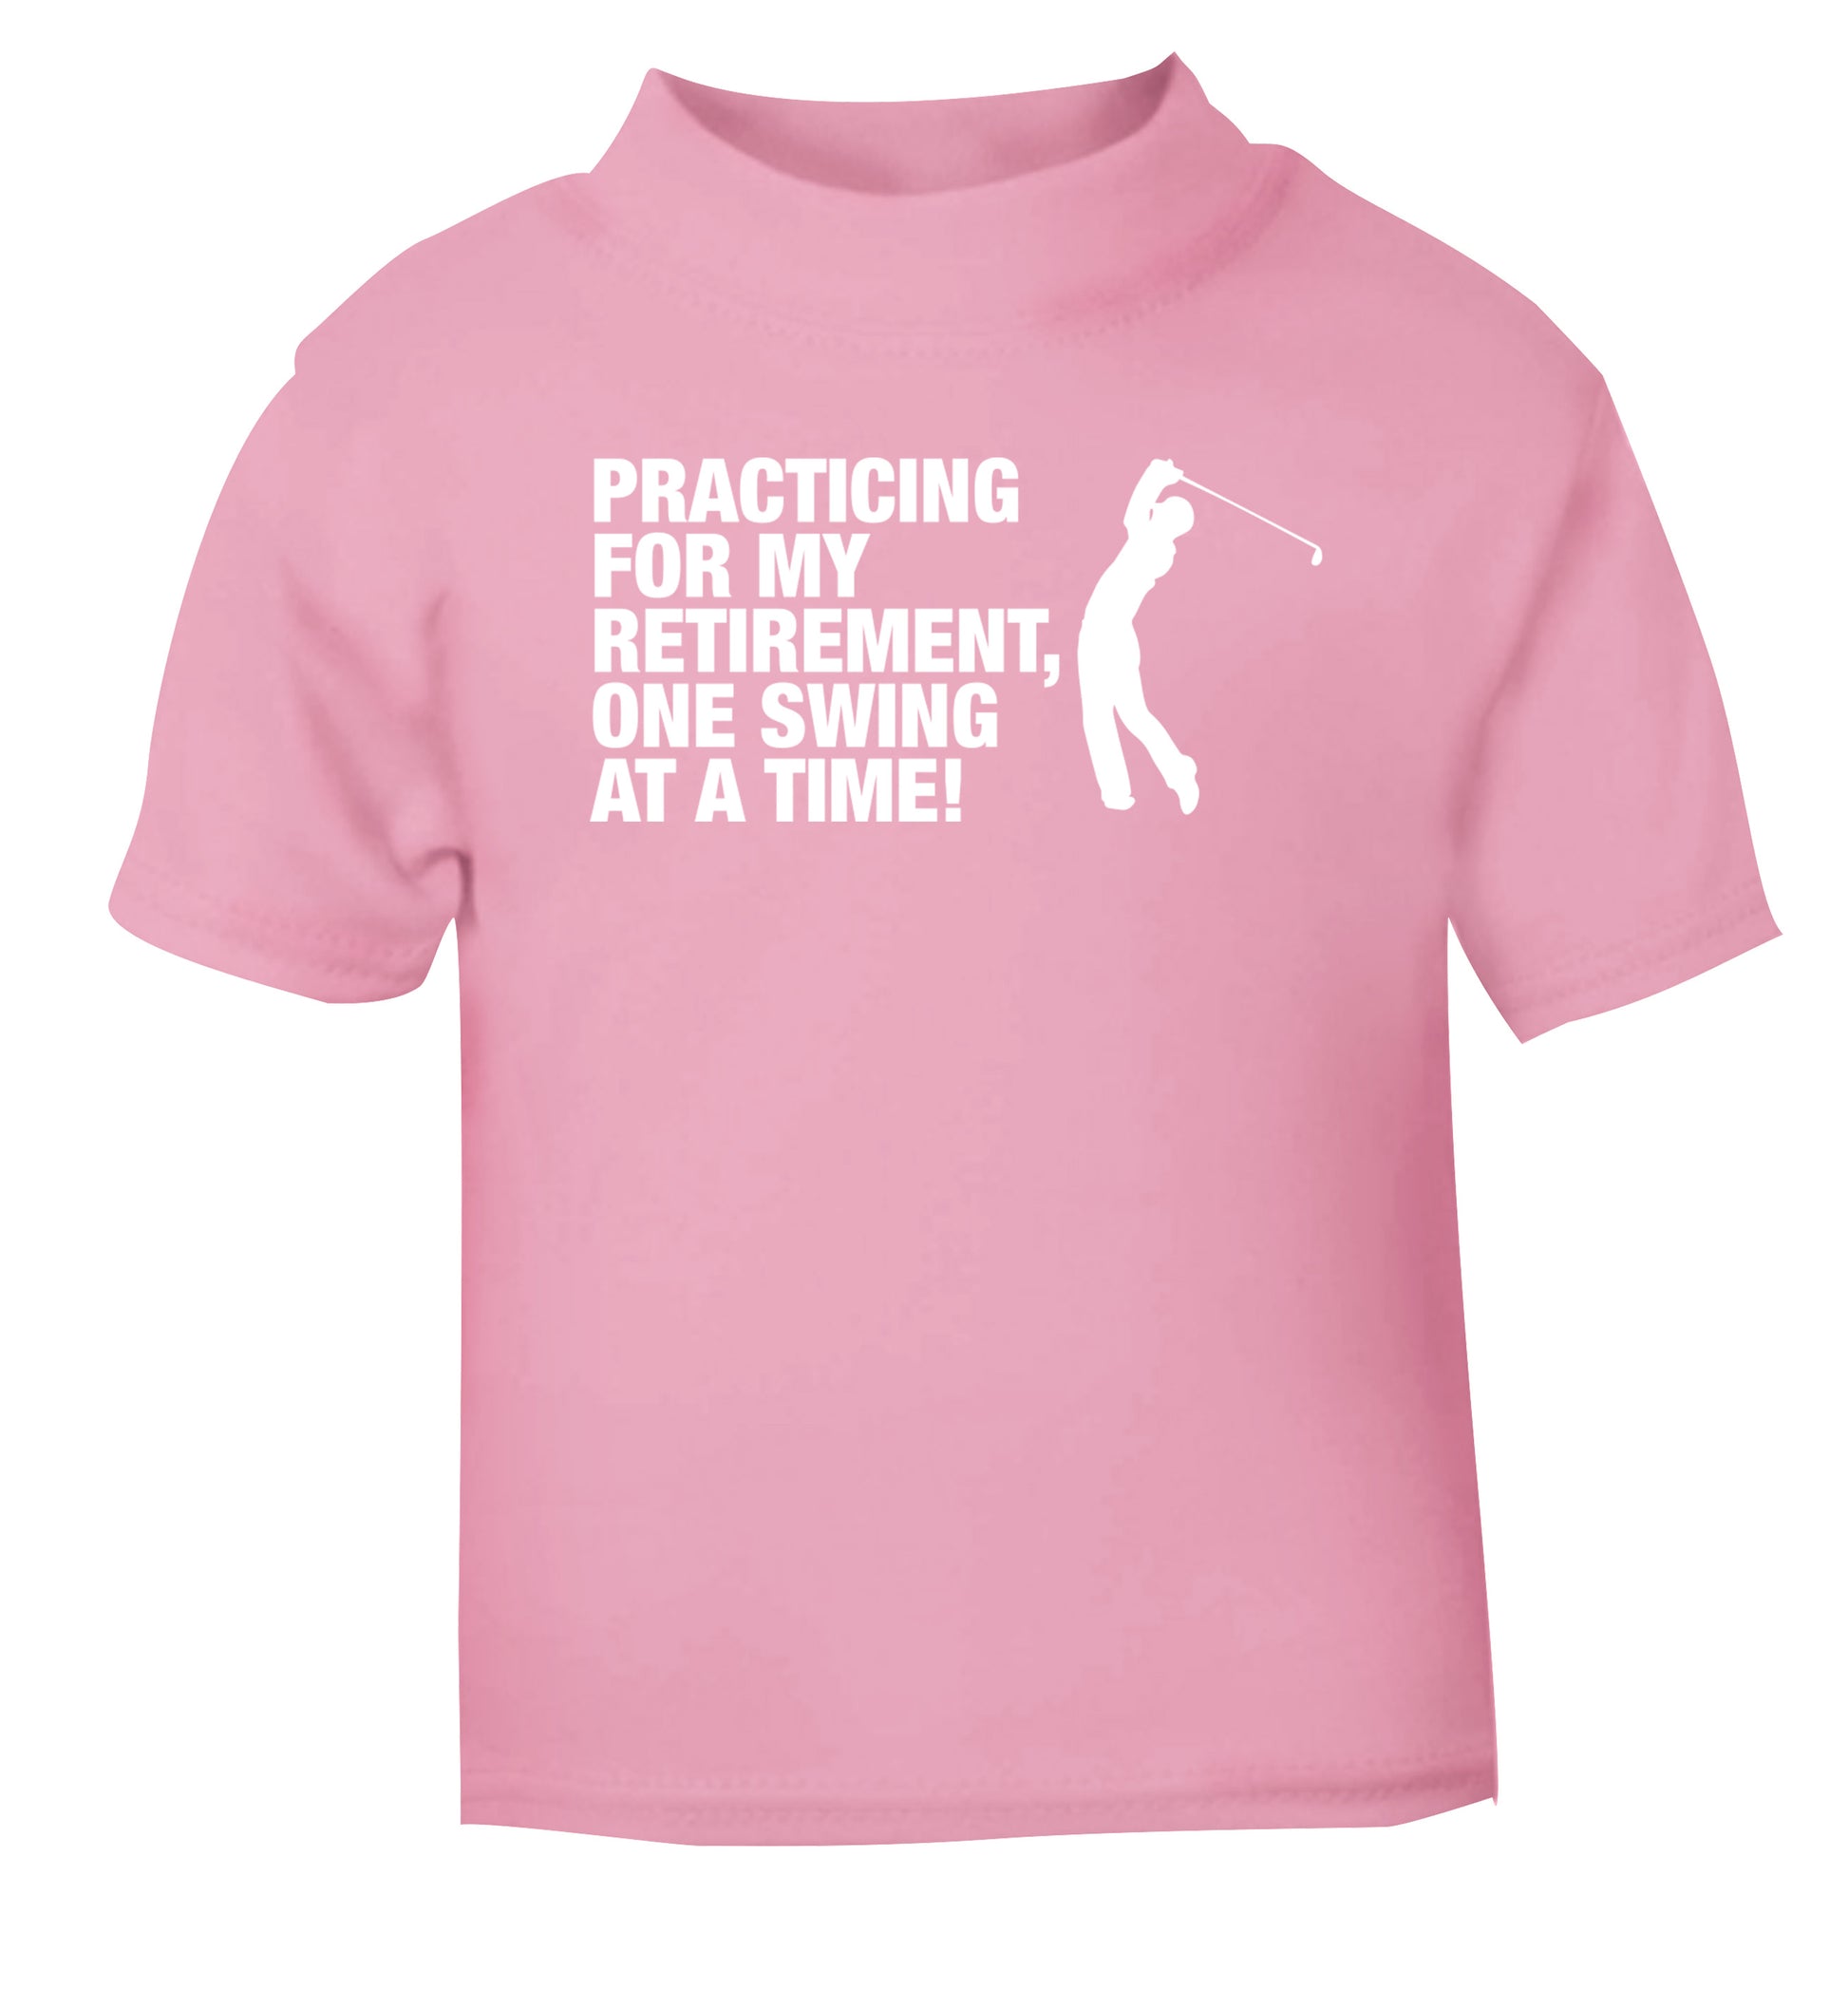 Practicing for my retirement one swing at a time light pink Baby Toddler Tshirt 2 Years